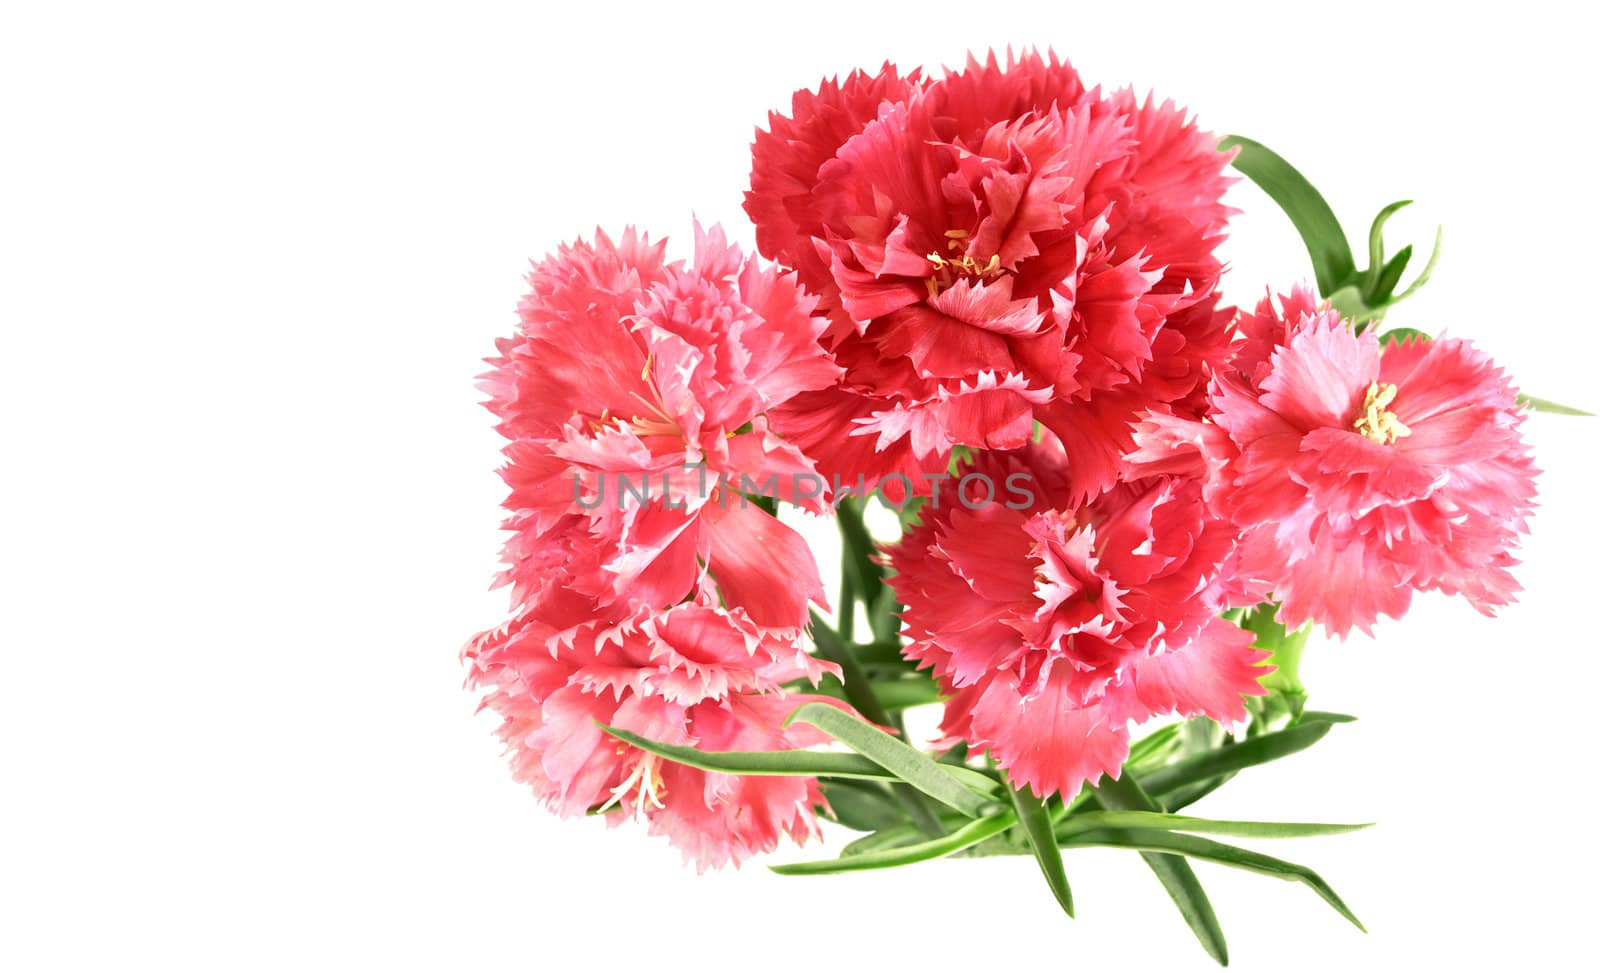  flower posy of pink carnations bouquet with copyspace by sherj